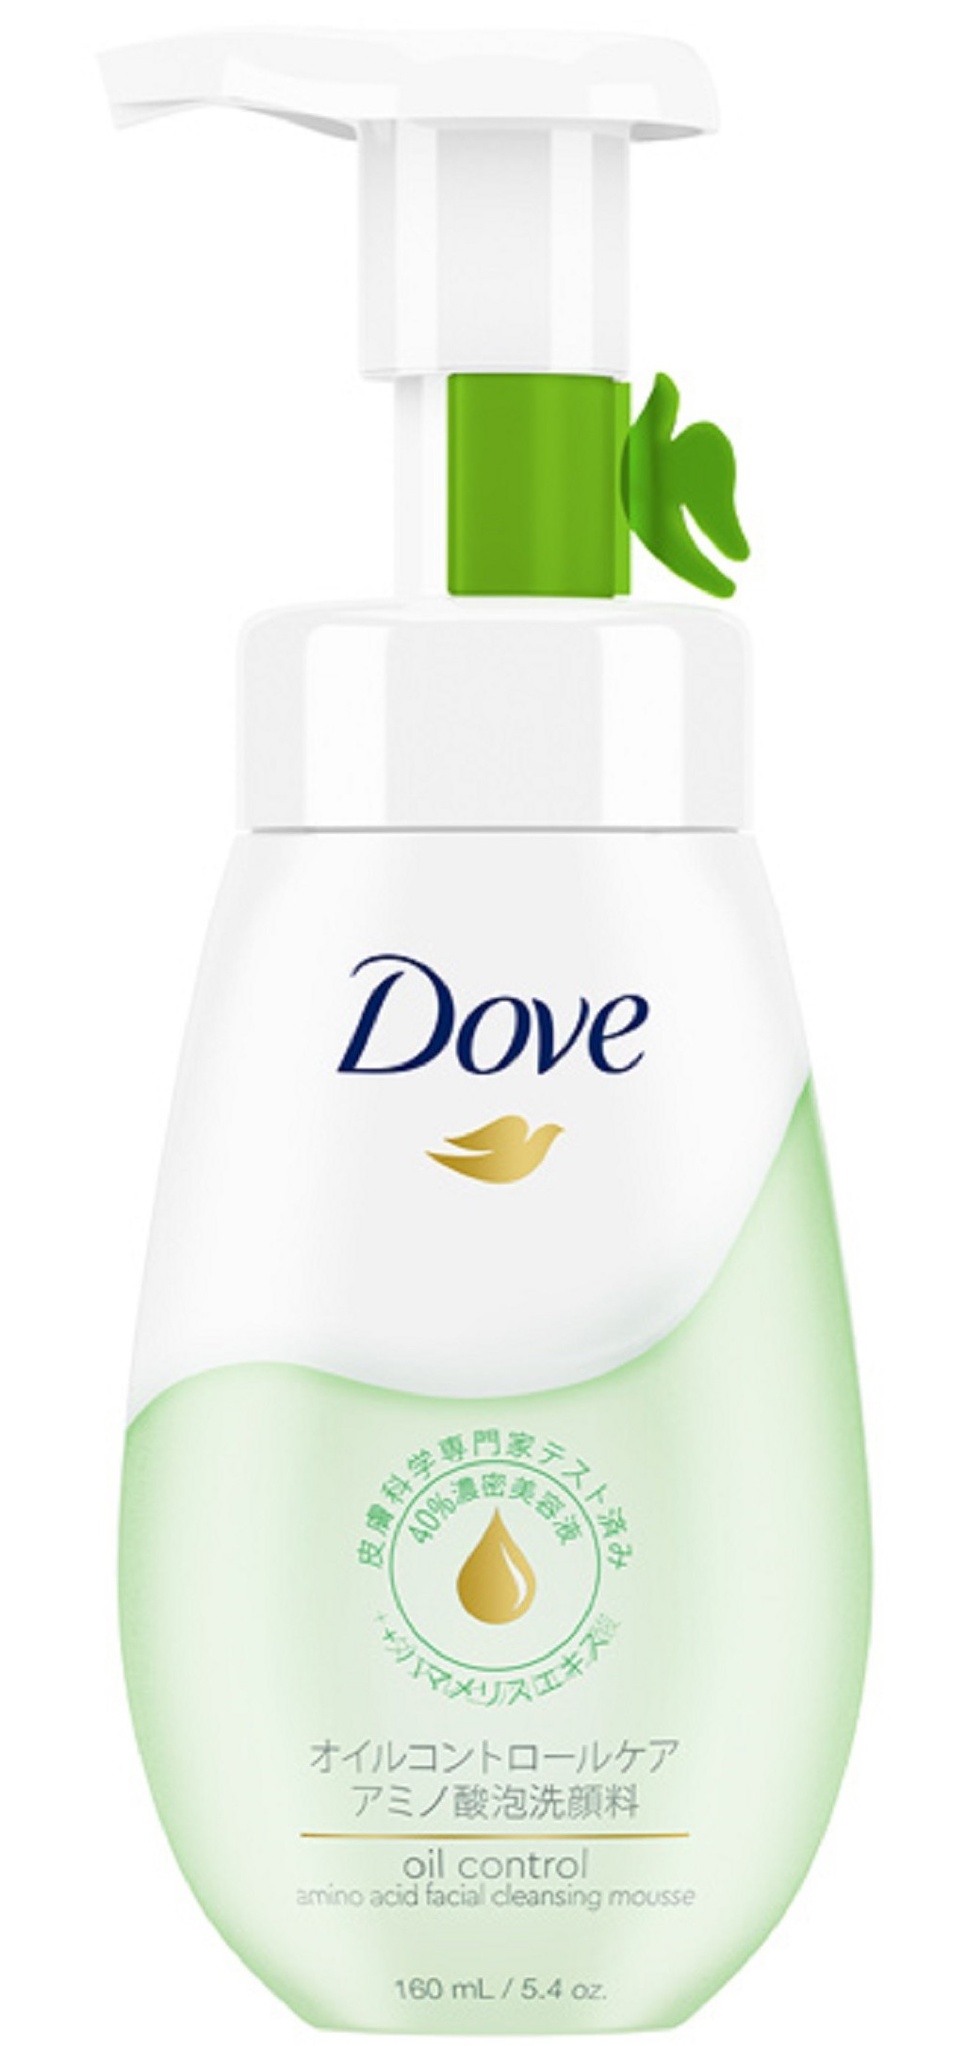 Dove Amino Acid Facial Cleansing Mousse Oil Control Care